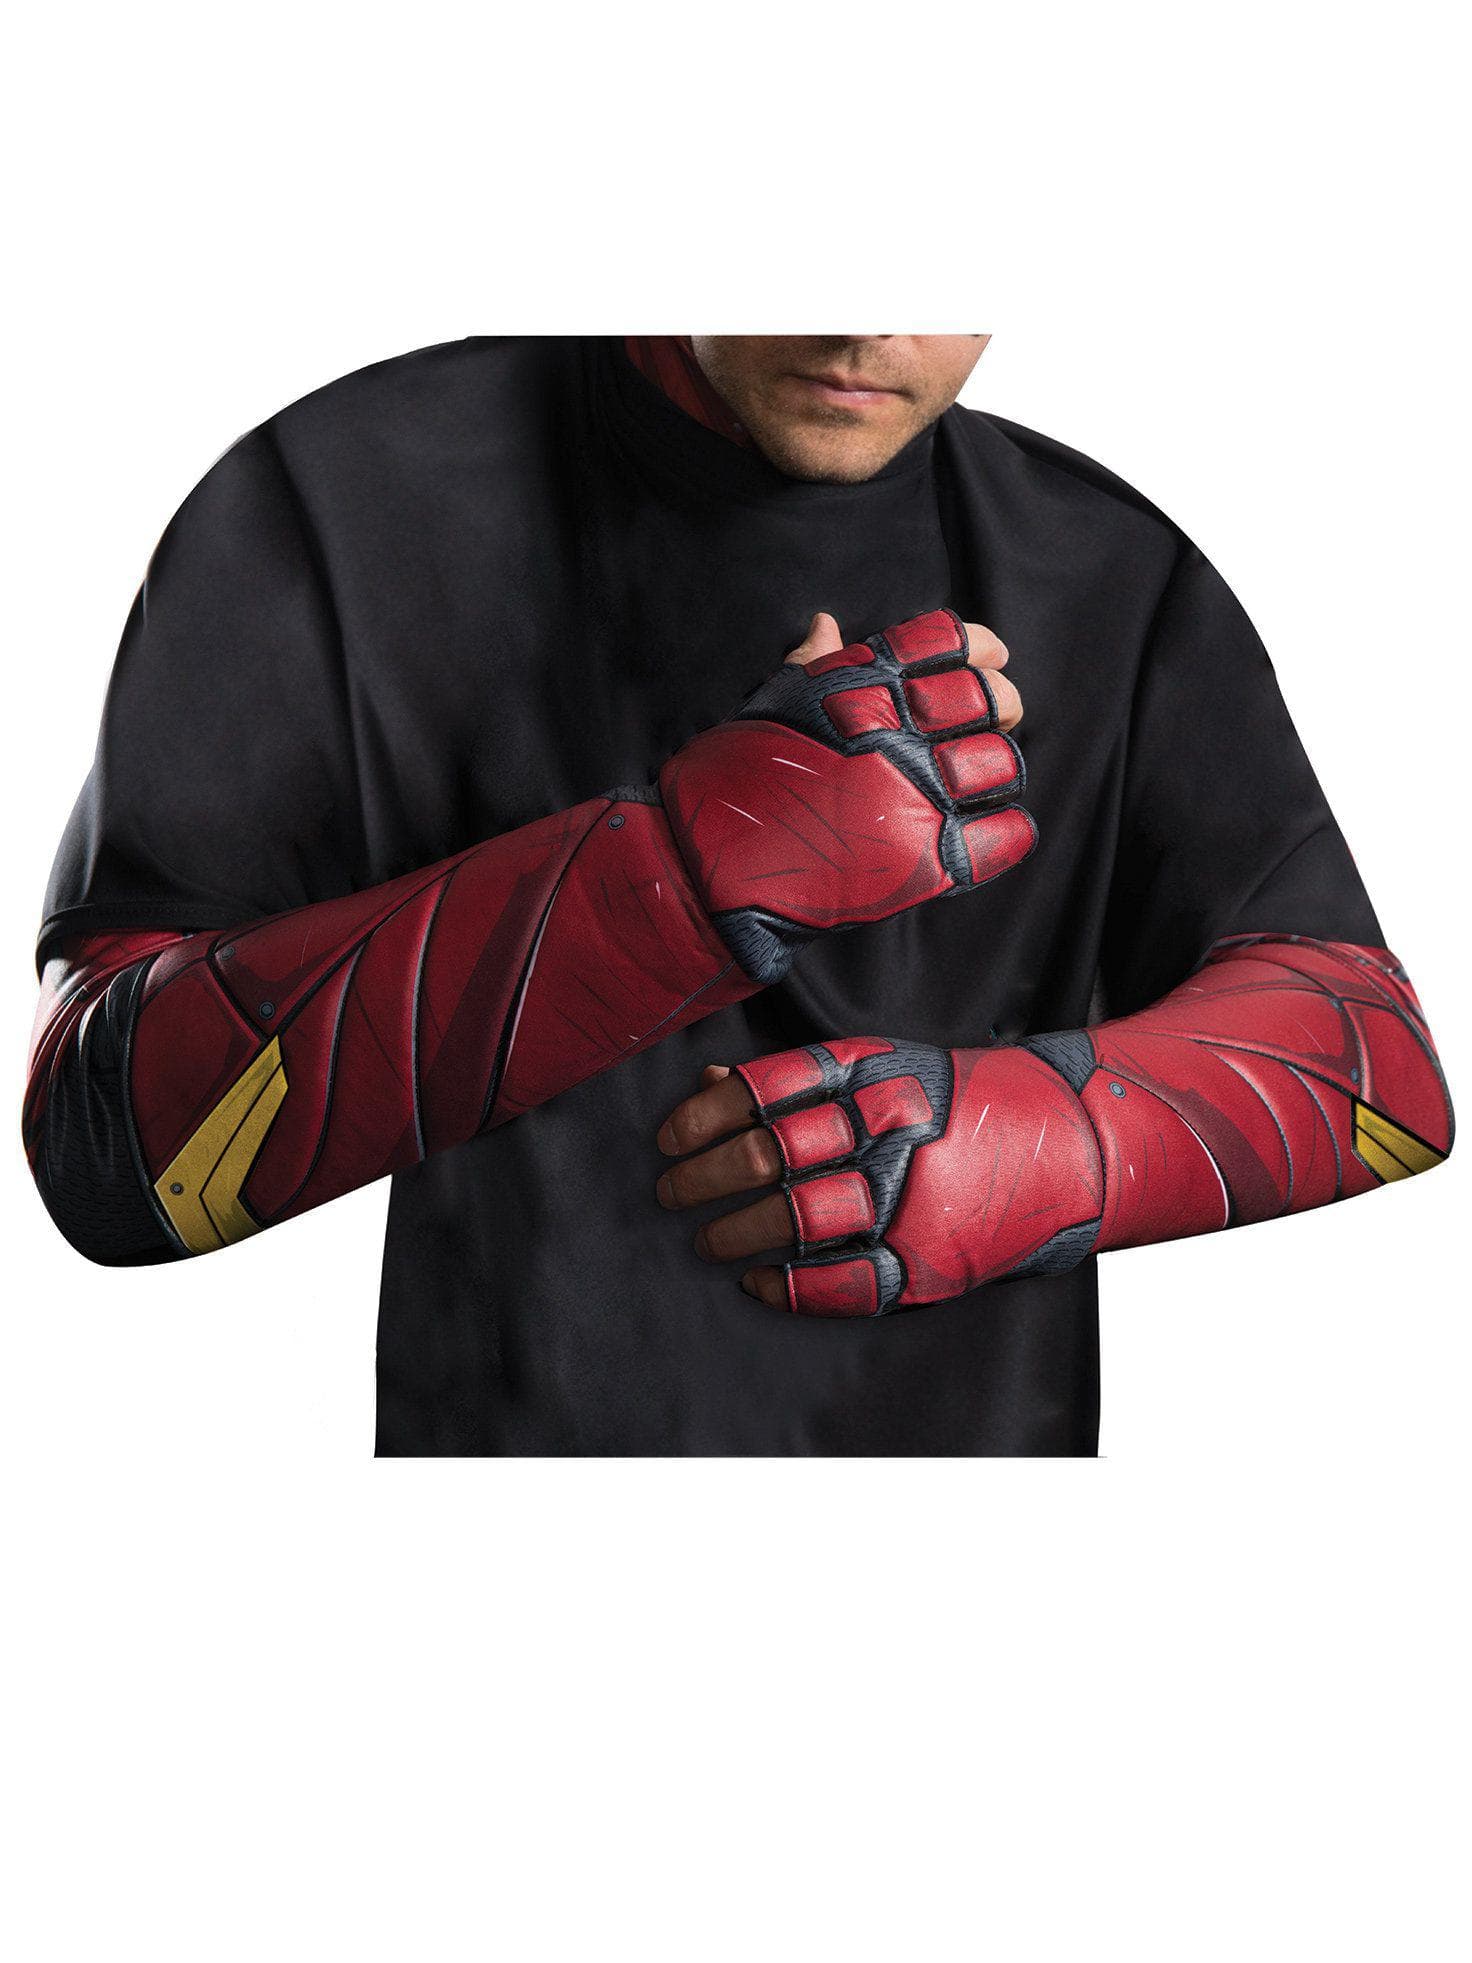 Adult Justice League Flash Gloves - costumes.com